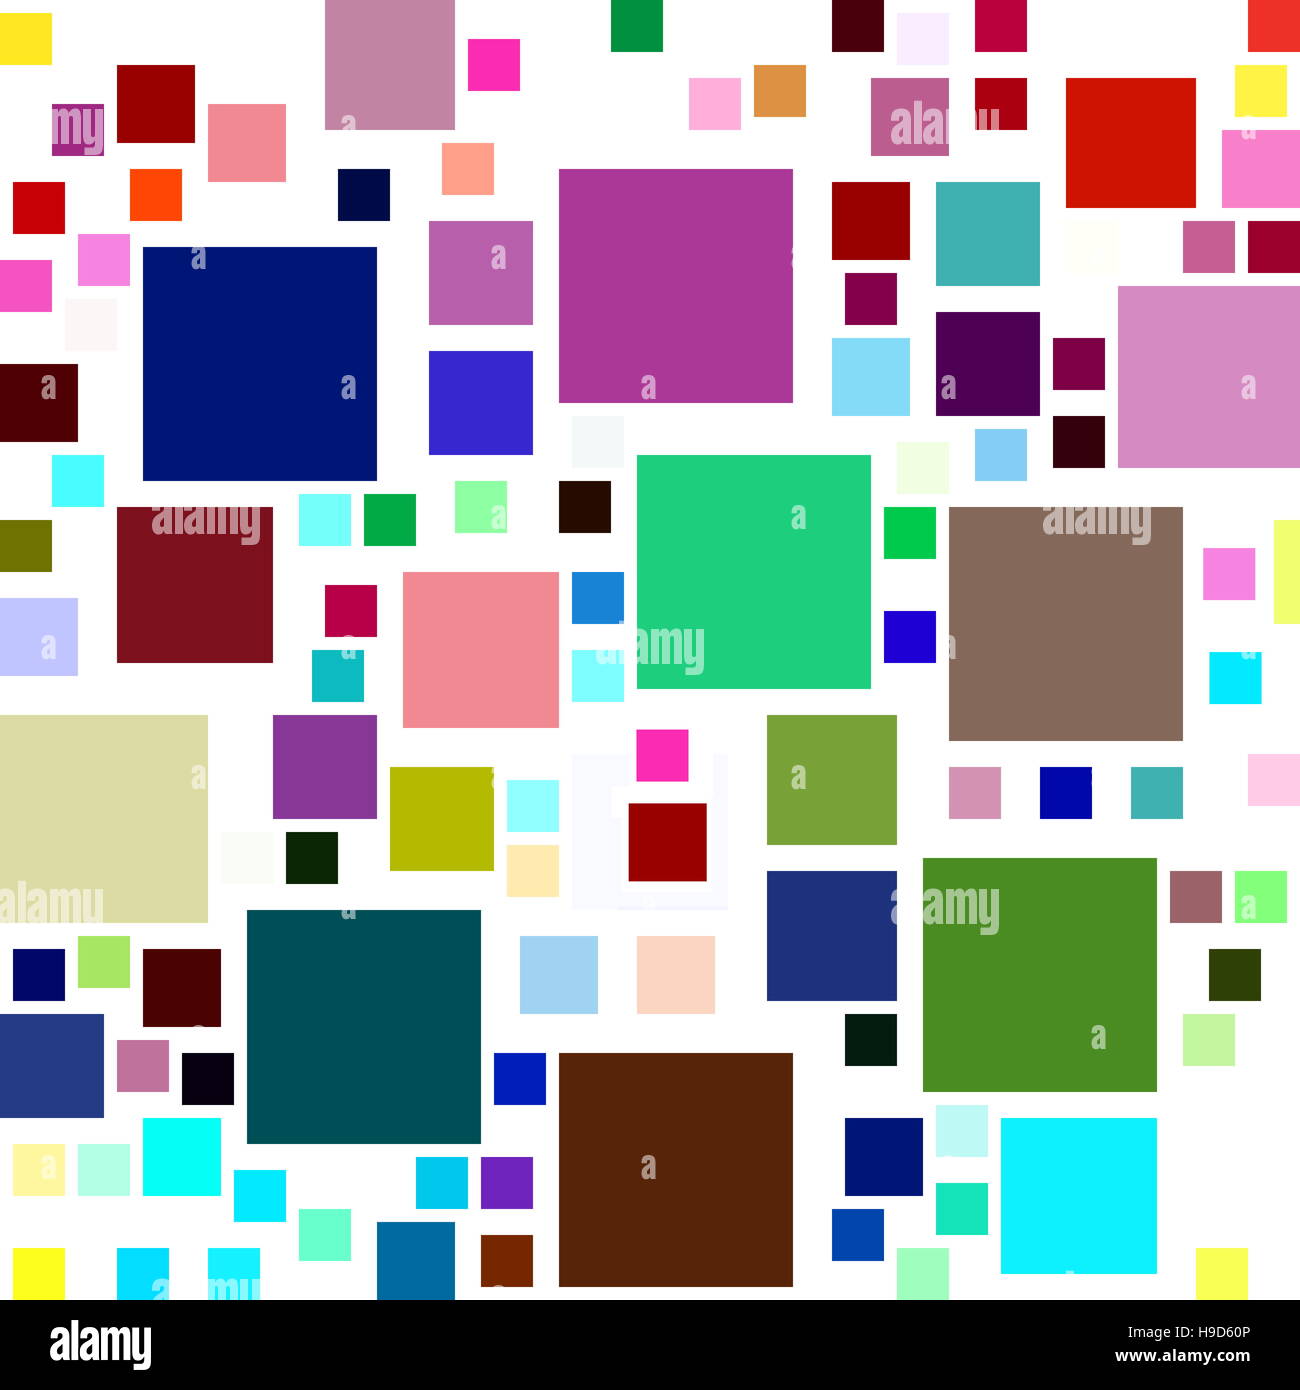 Lots of colourful square shapes on a white background. Stock Photo